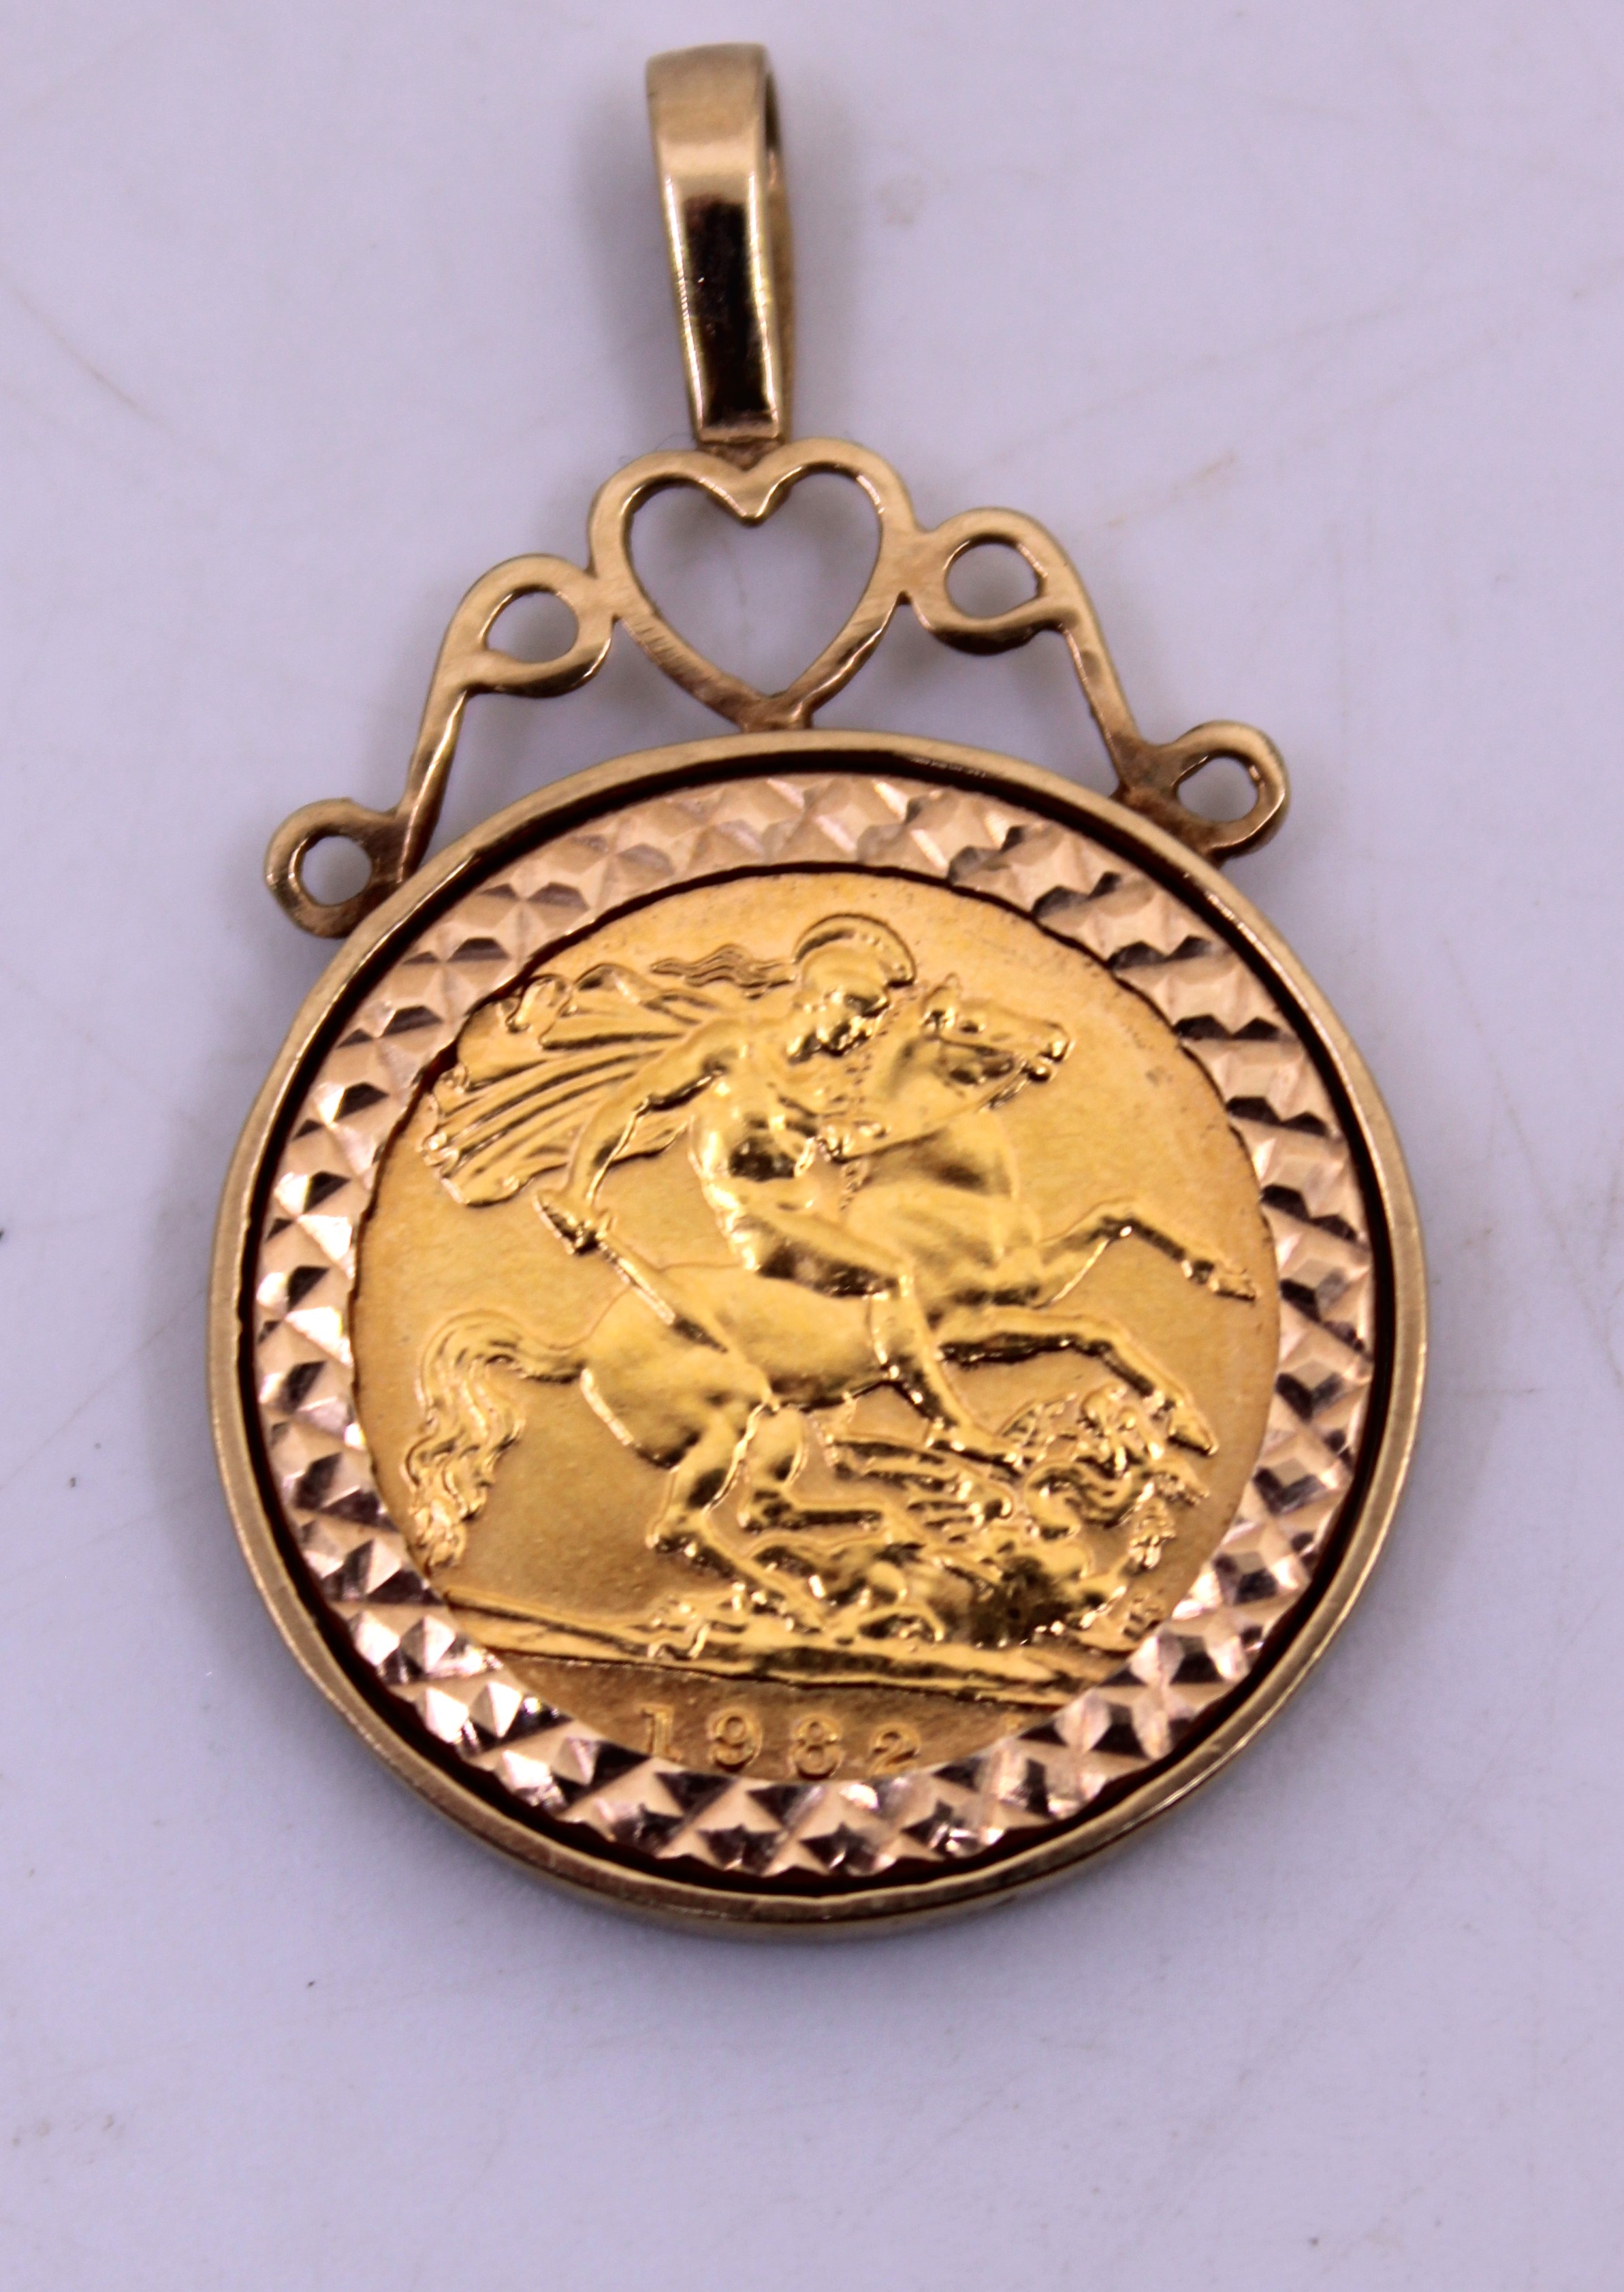 1982 Half Sovereign & Mount Pendant.  The pendant bale is hallmarked "375" for 9ct Gold.  The